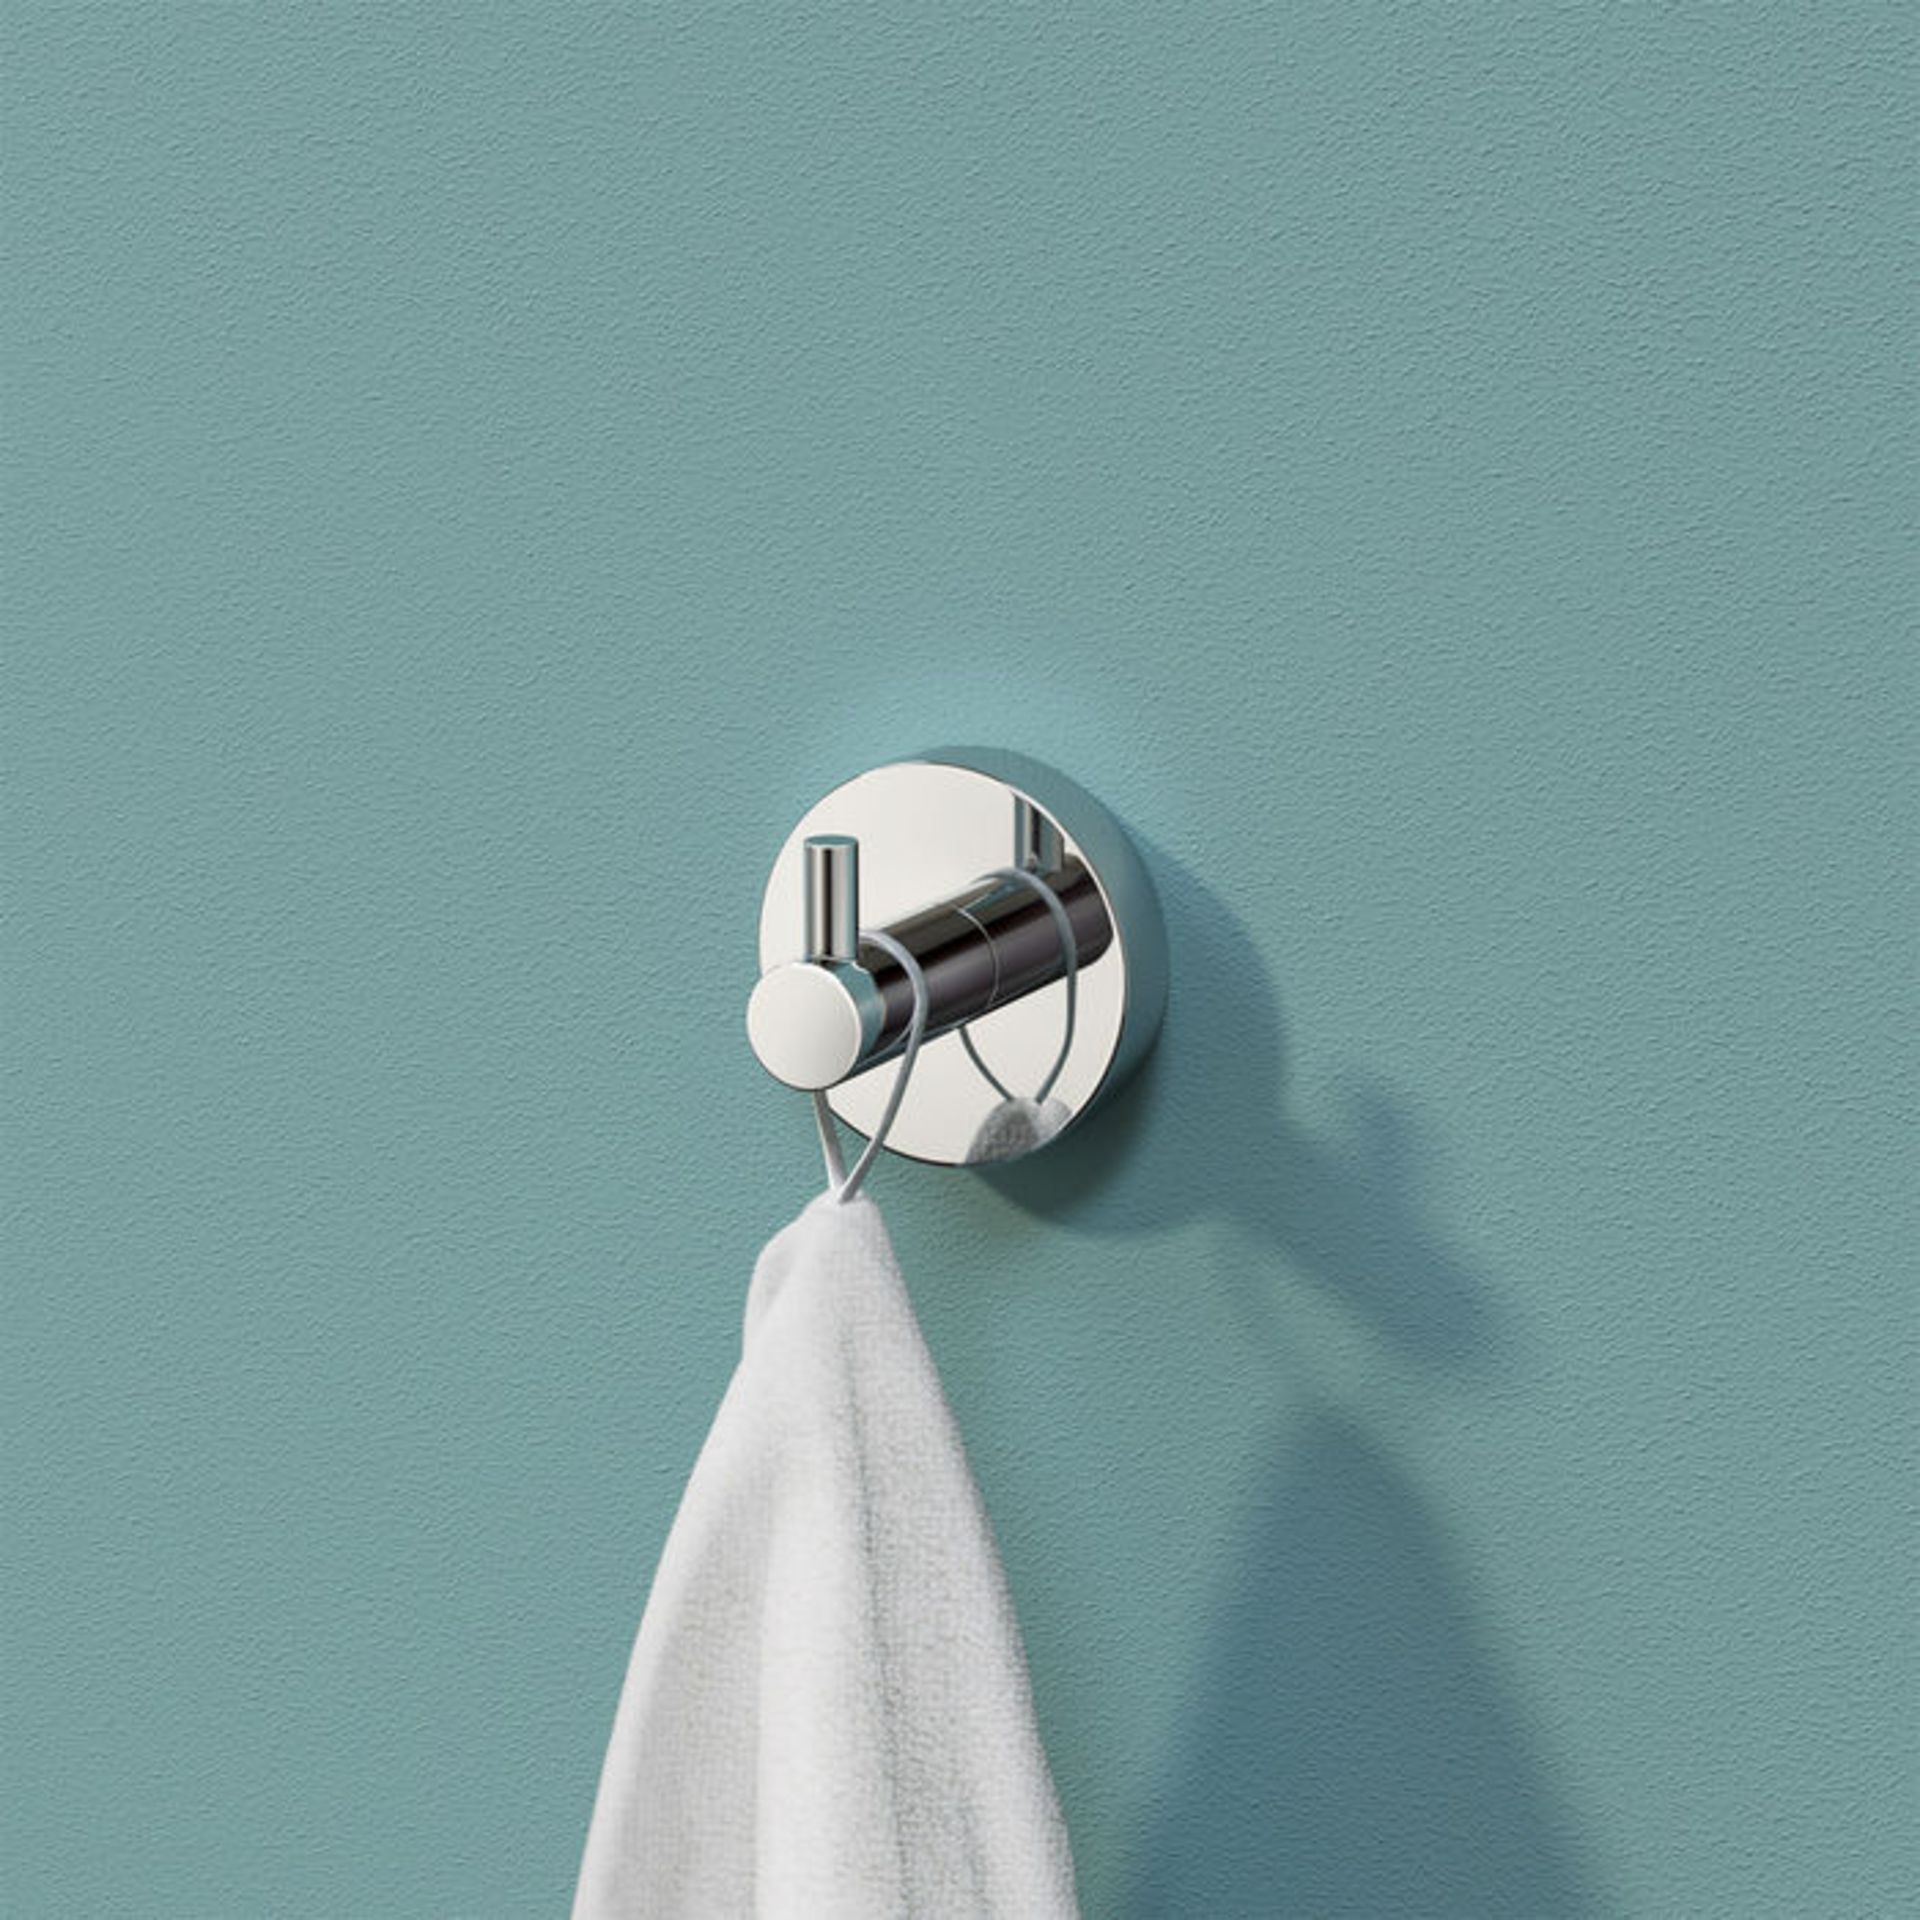 (D1003) Finsbury Robe Hook. Finishes your bathroom with a little extra functionality and style...